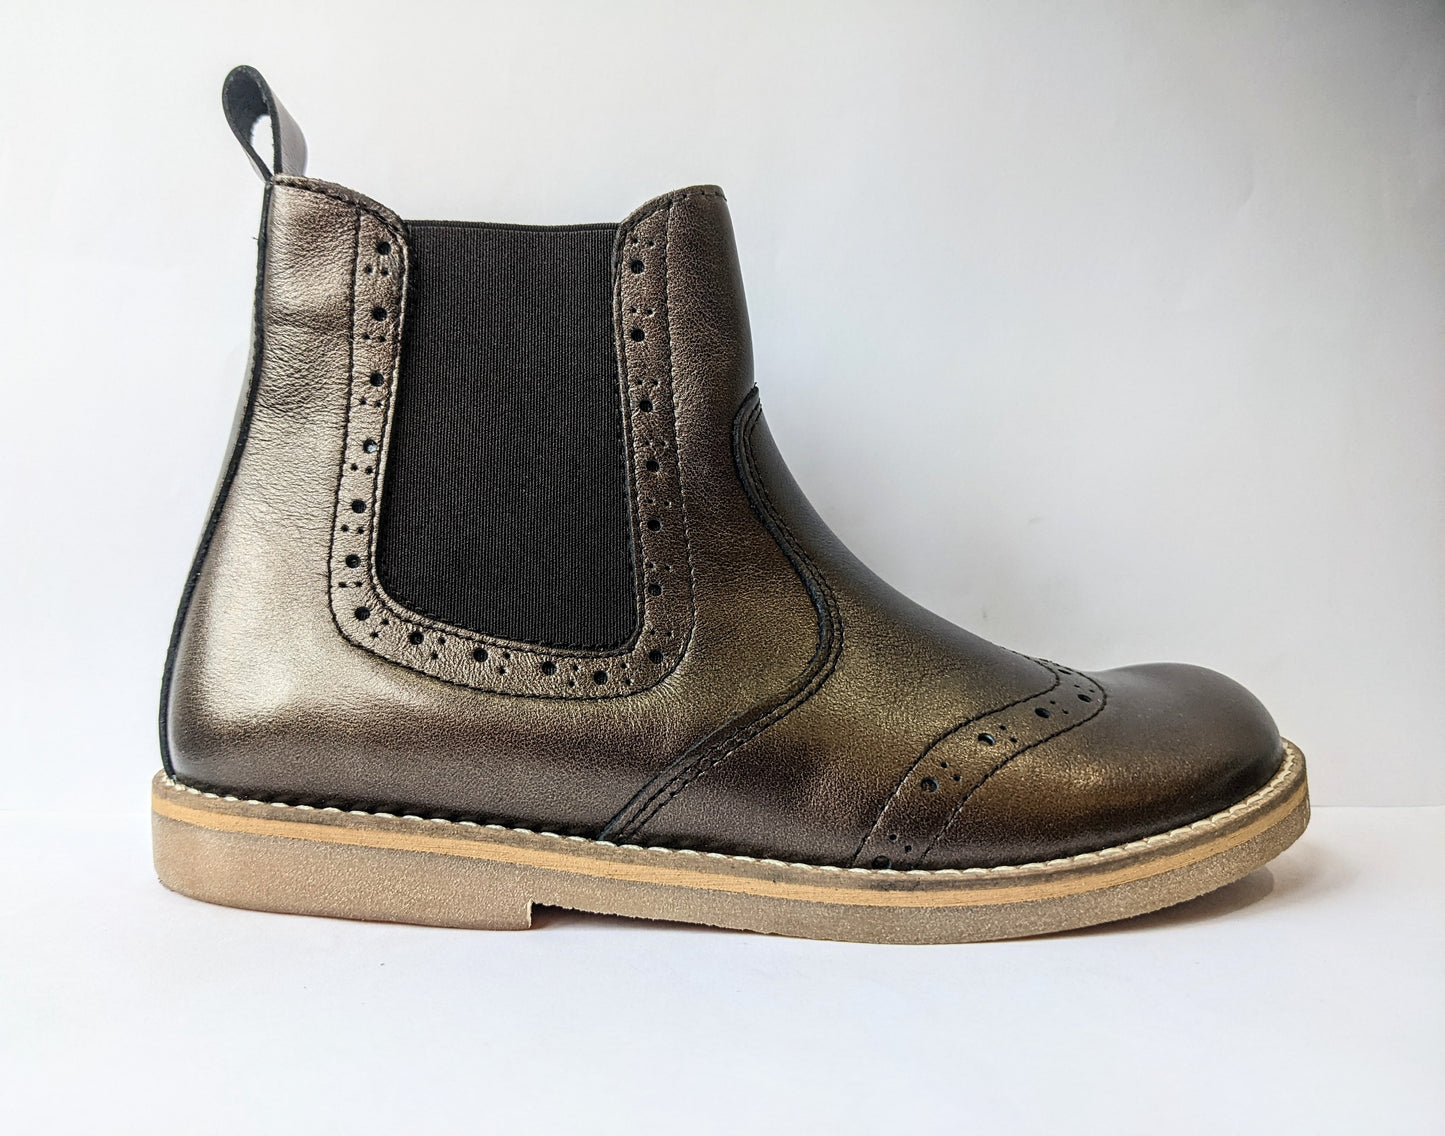  A girls ankle boot by Froddo, style Chelys Brogue G3160080-13,in bronze leather with zip fastening.  Right side view.